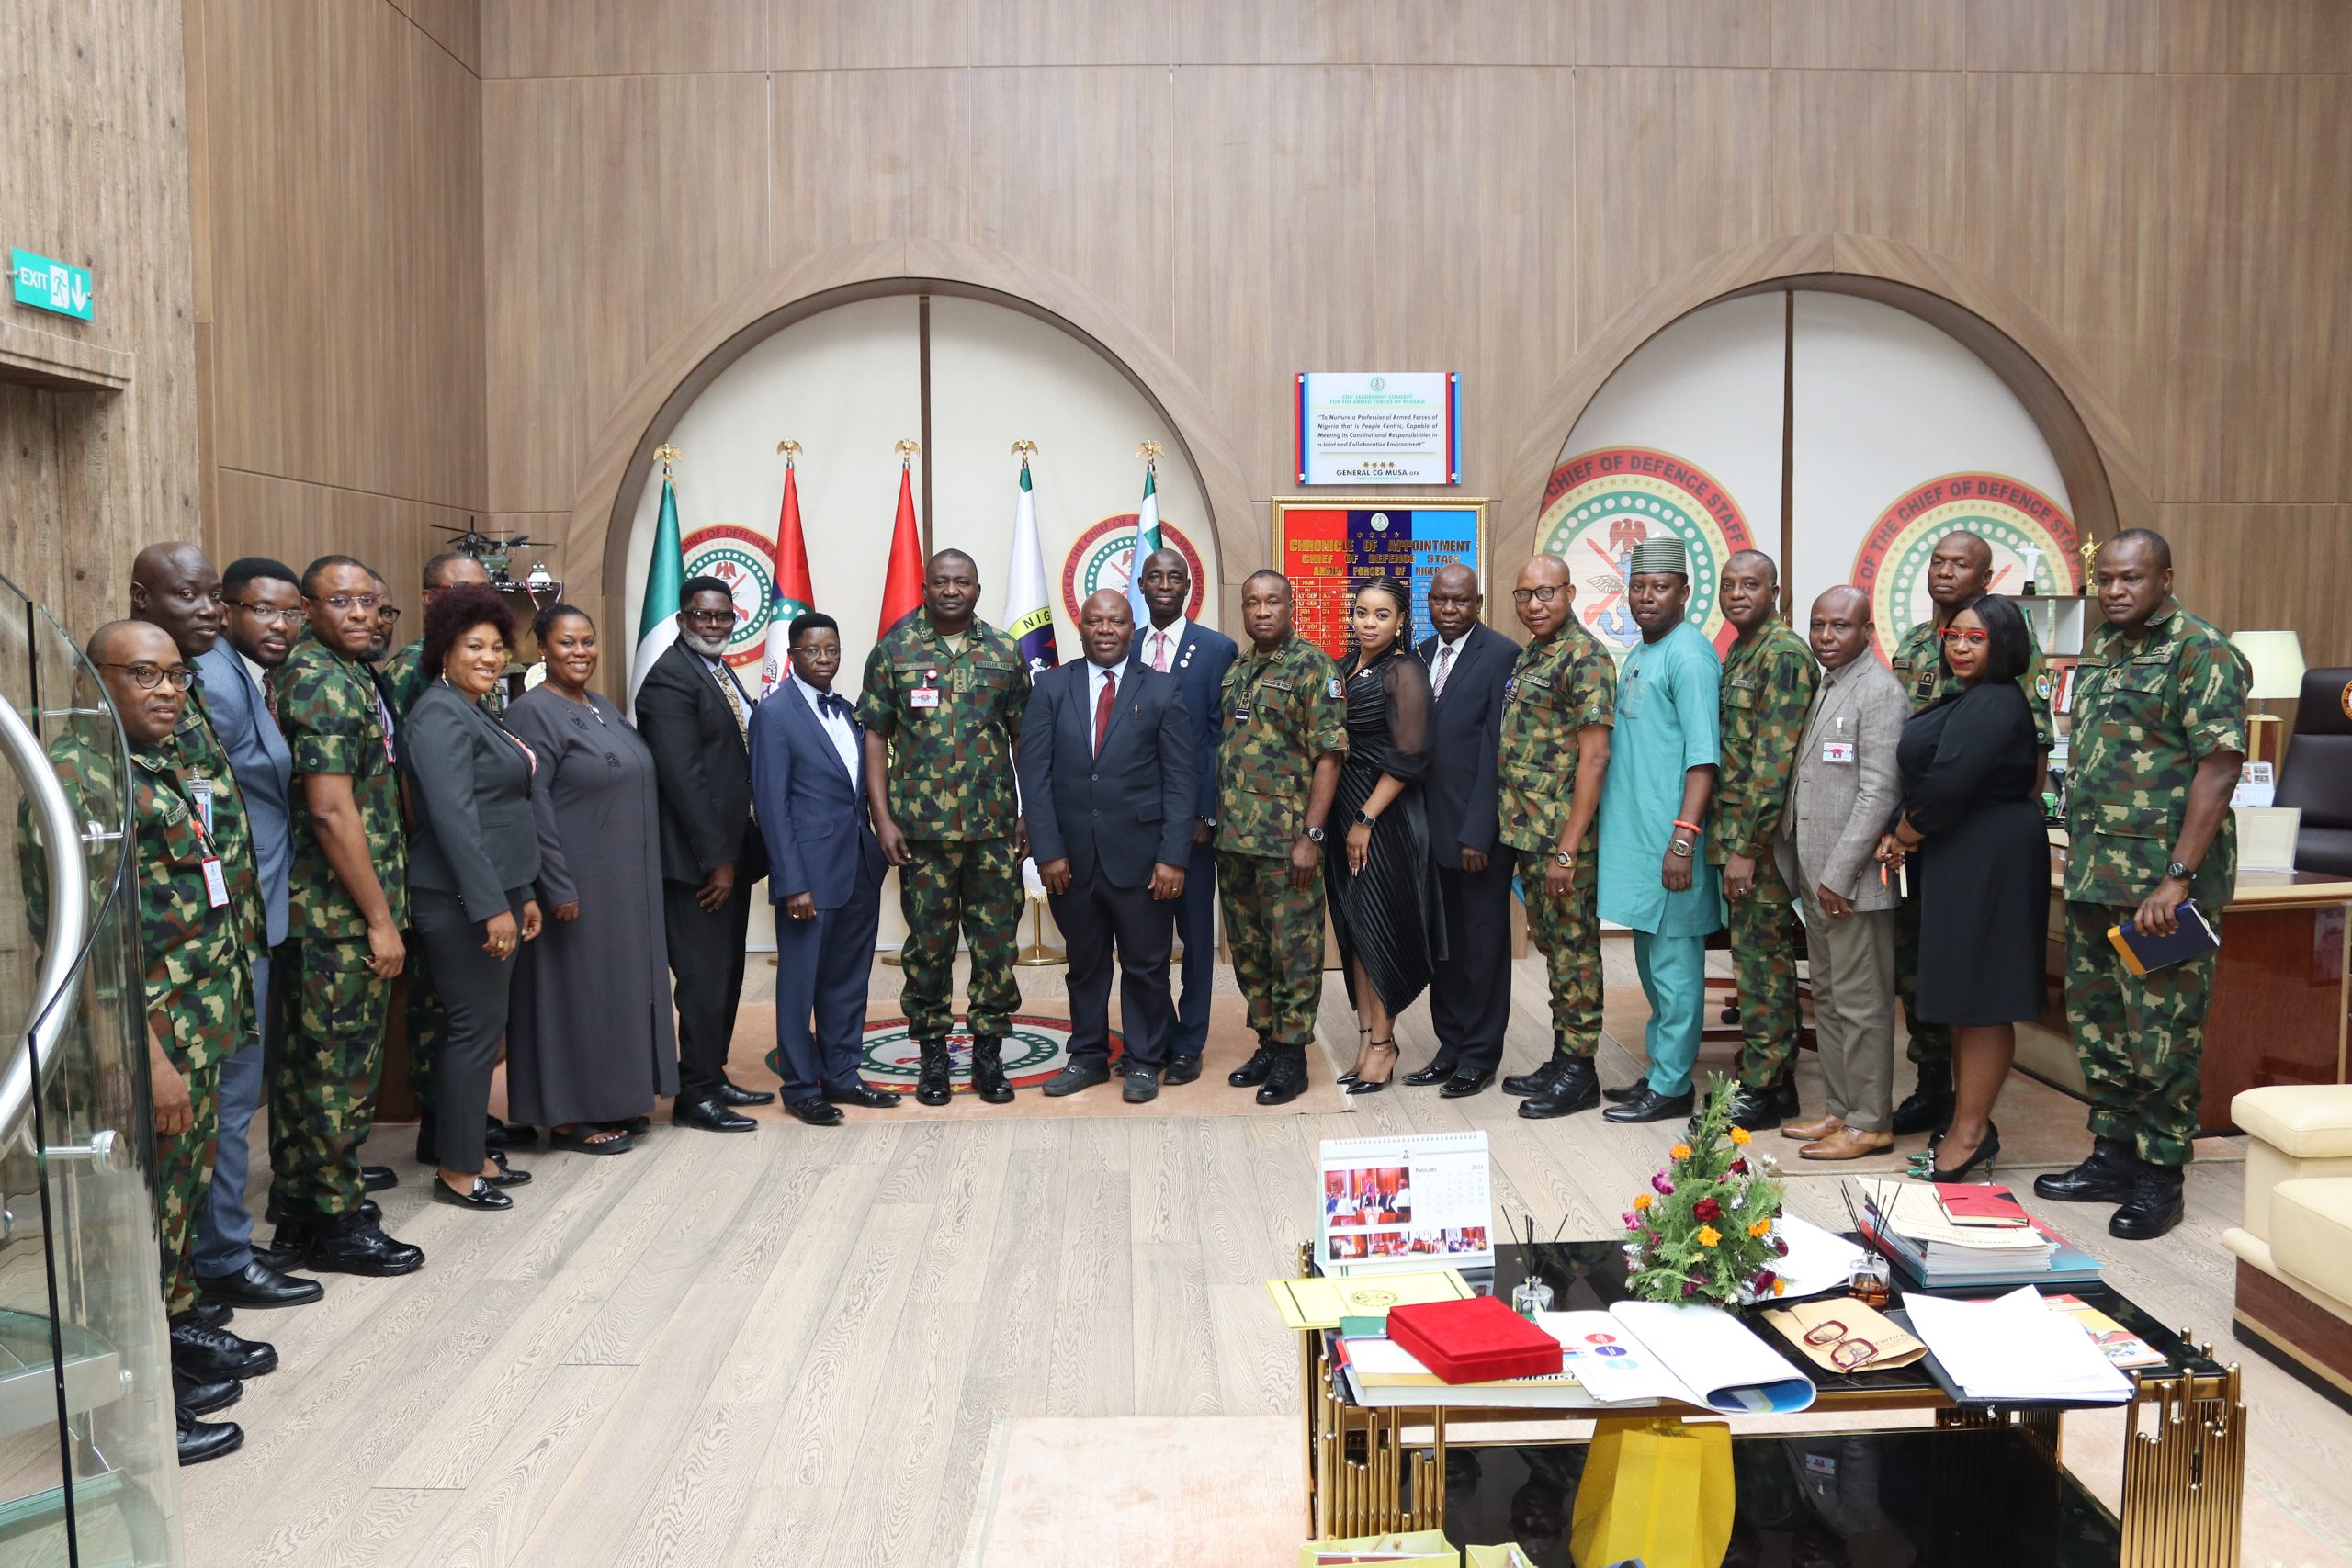 AFBA visit to the Chief of Defence Staff of Nigeria Gen. Christopher Musa